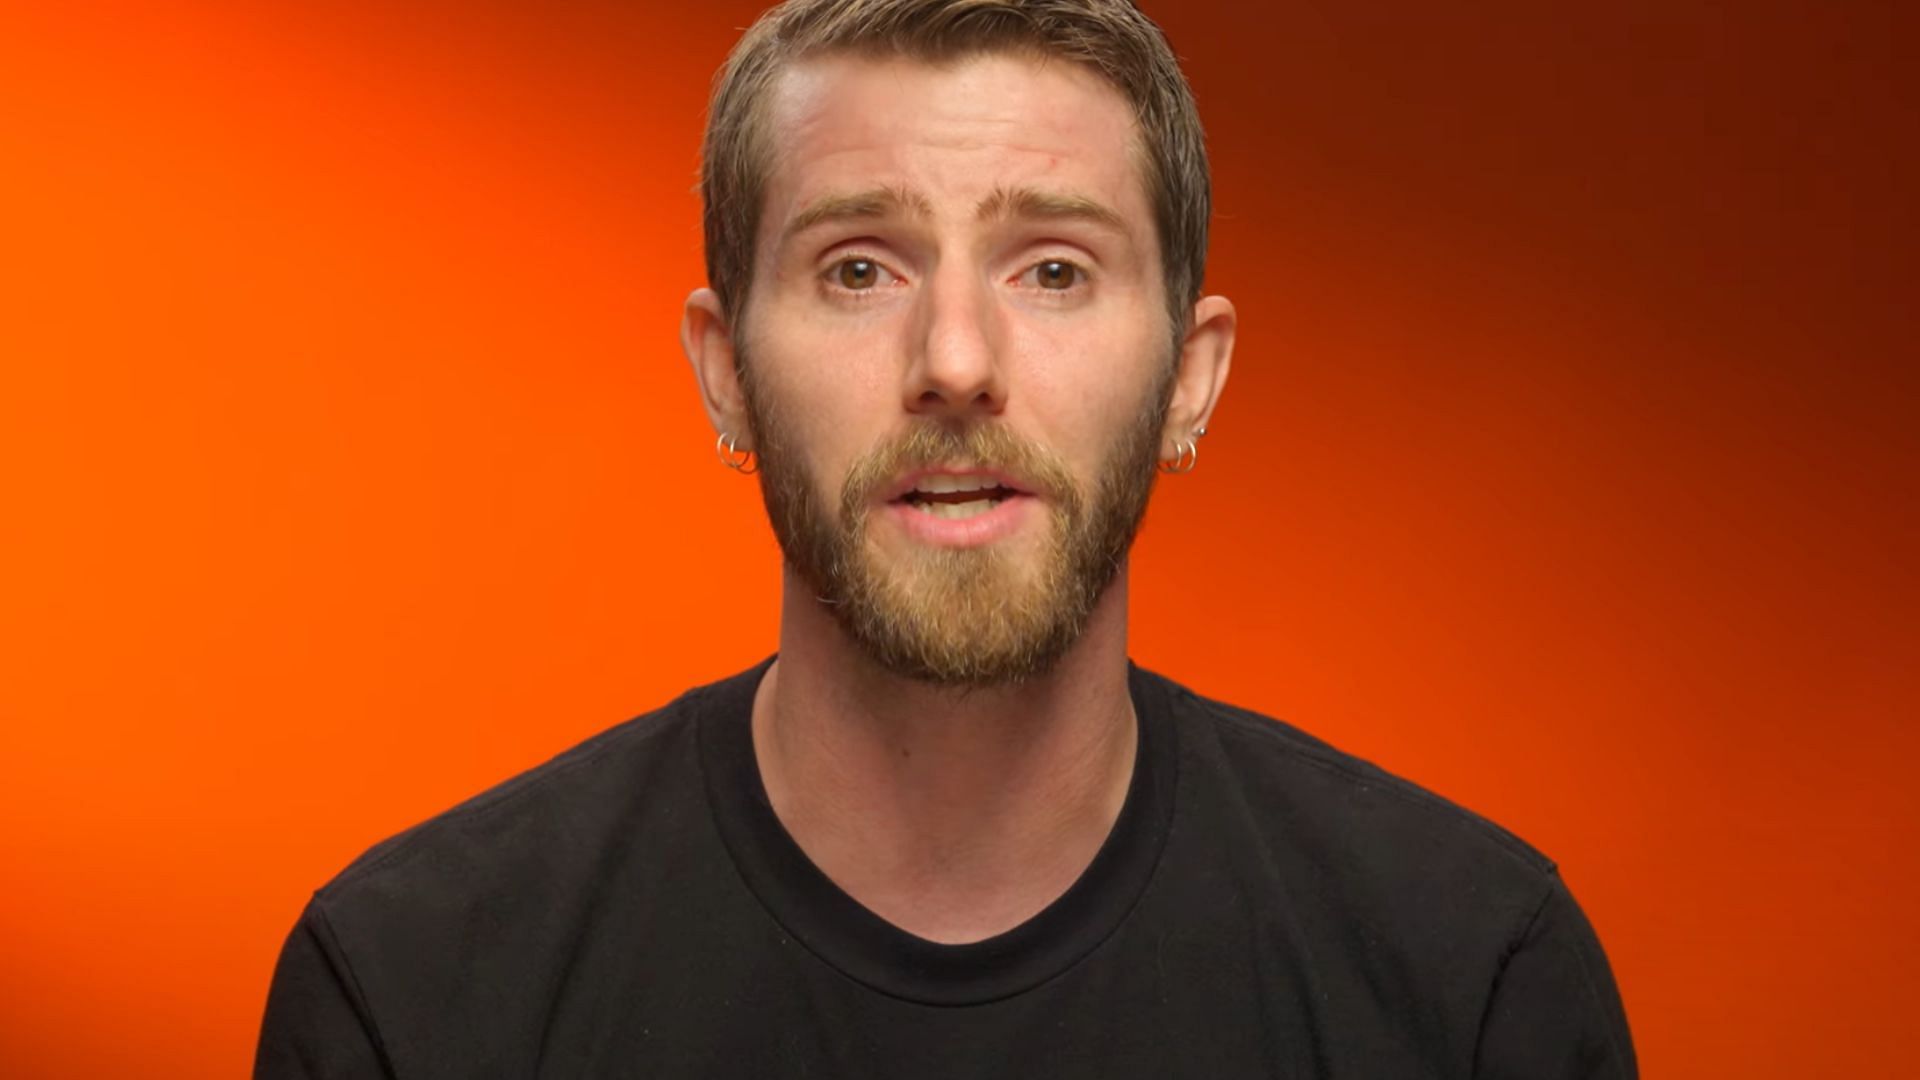 Linus Tech Tips has outlined new reforms for its videos (Image via Linus Tech Tips/YouTube)